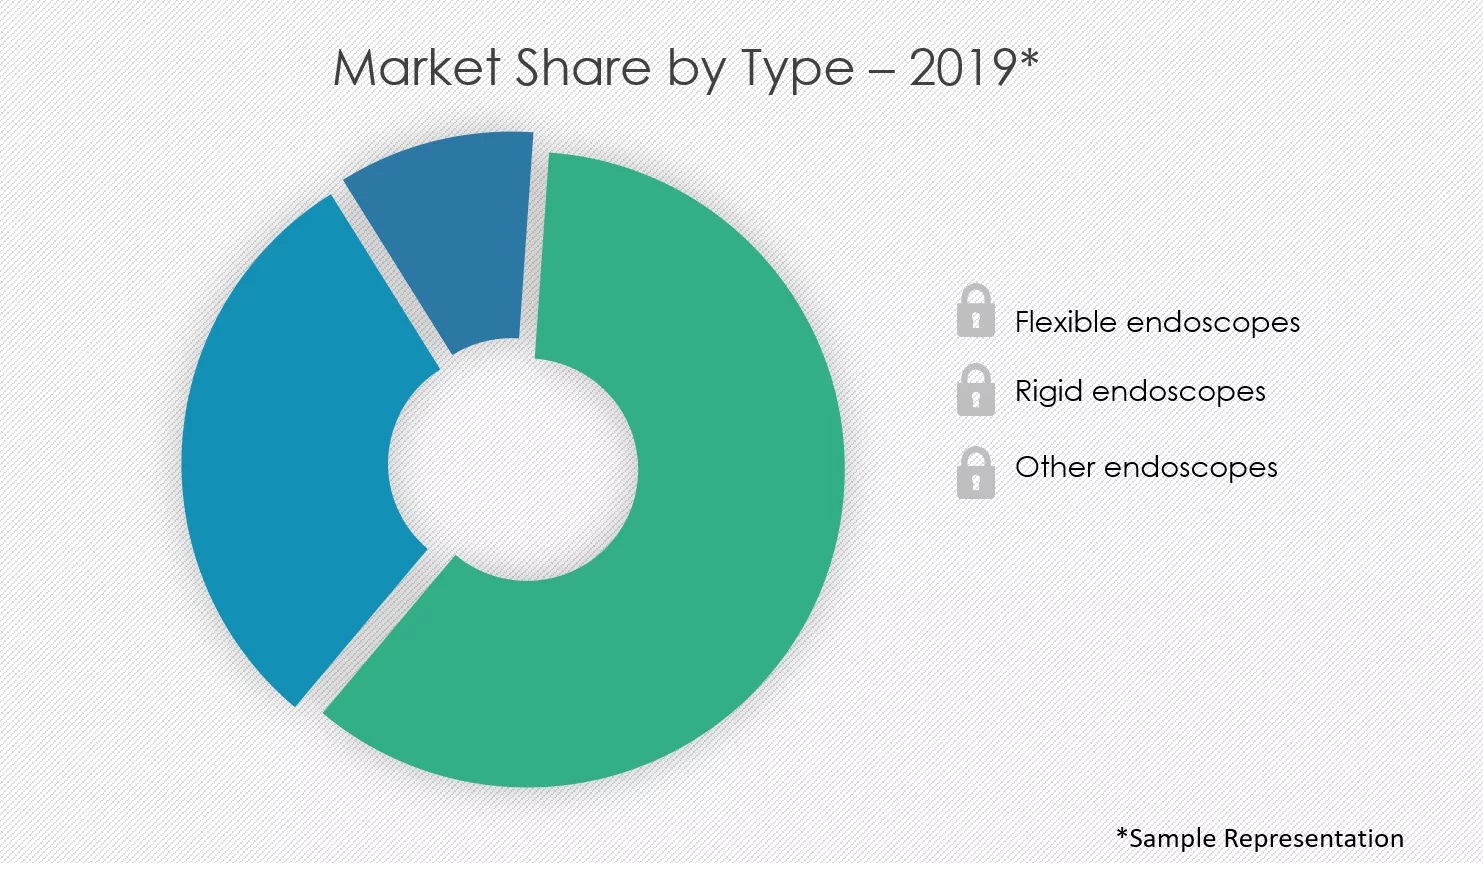 Veterinary-Endoscopy-Devices-Market-Share-by-Type